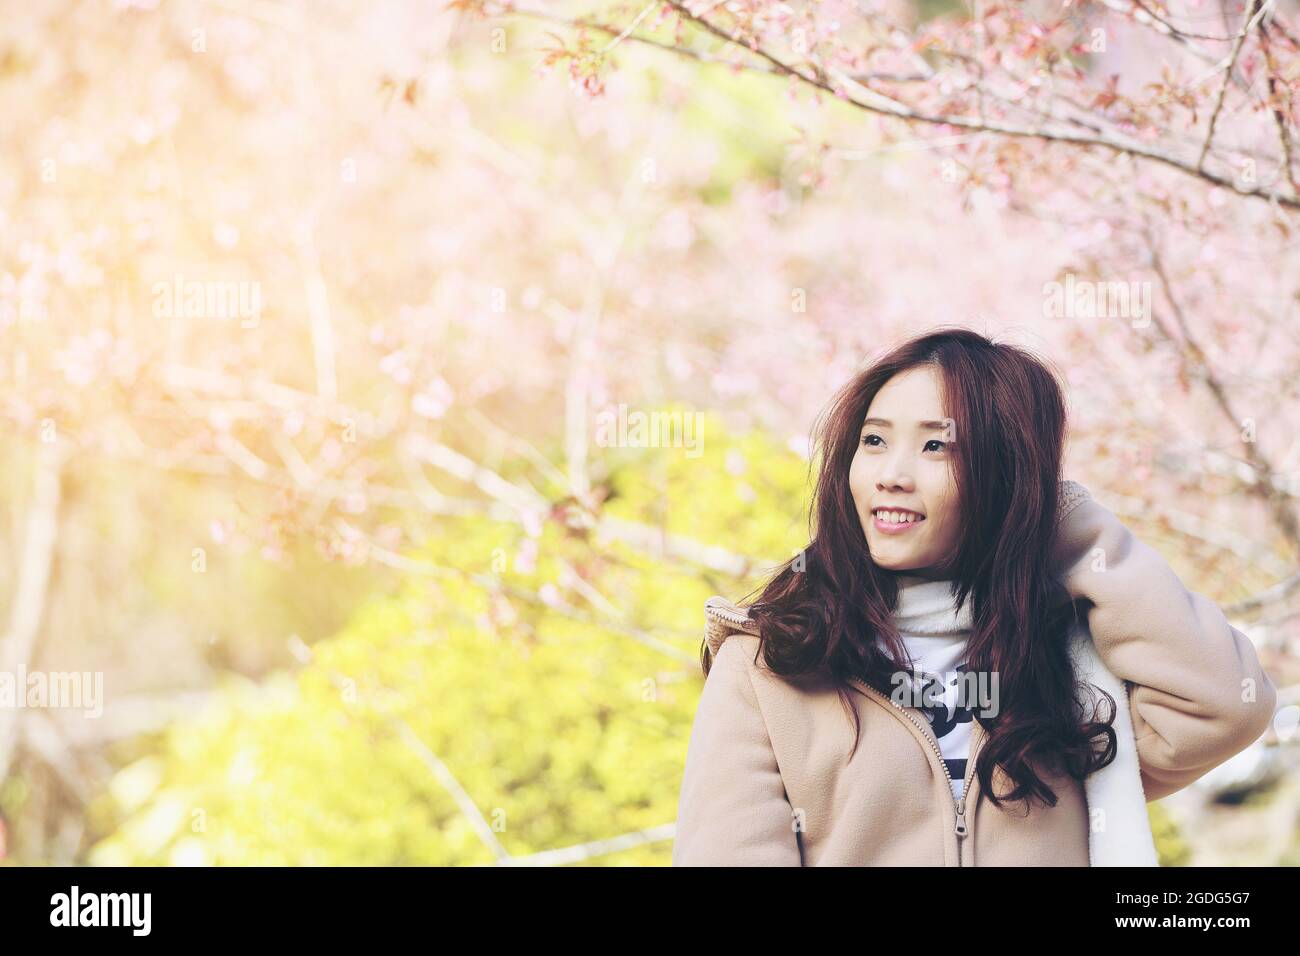 Asian Woman with cherry blossom nature background Stock Photo